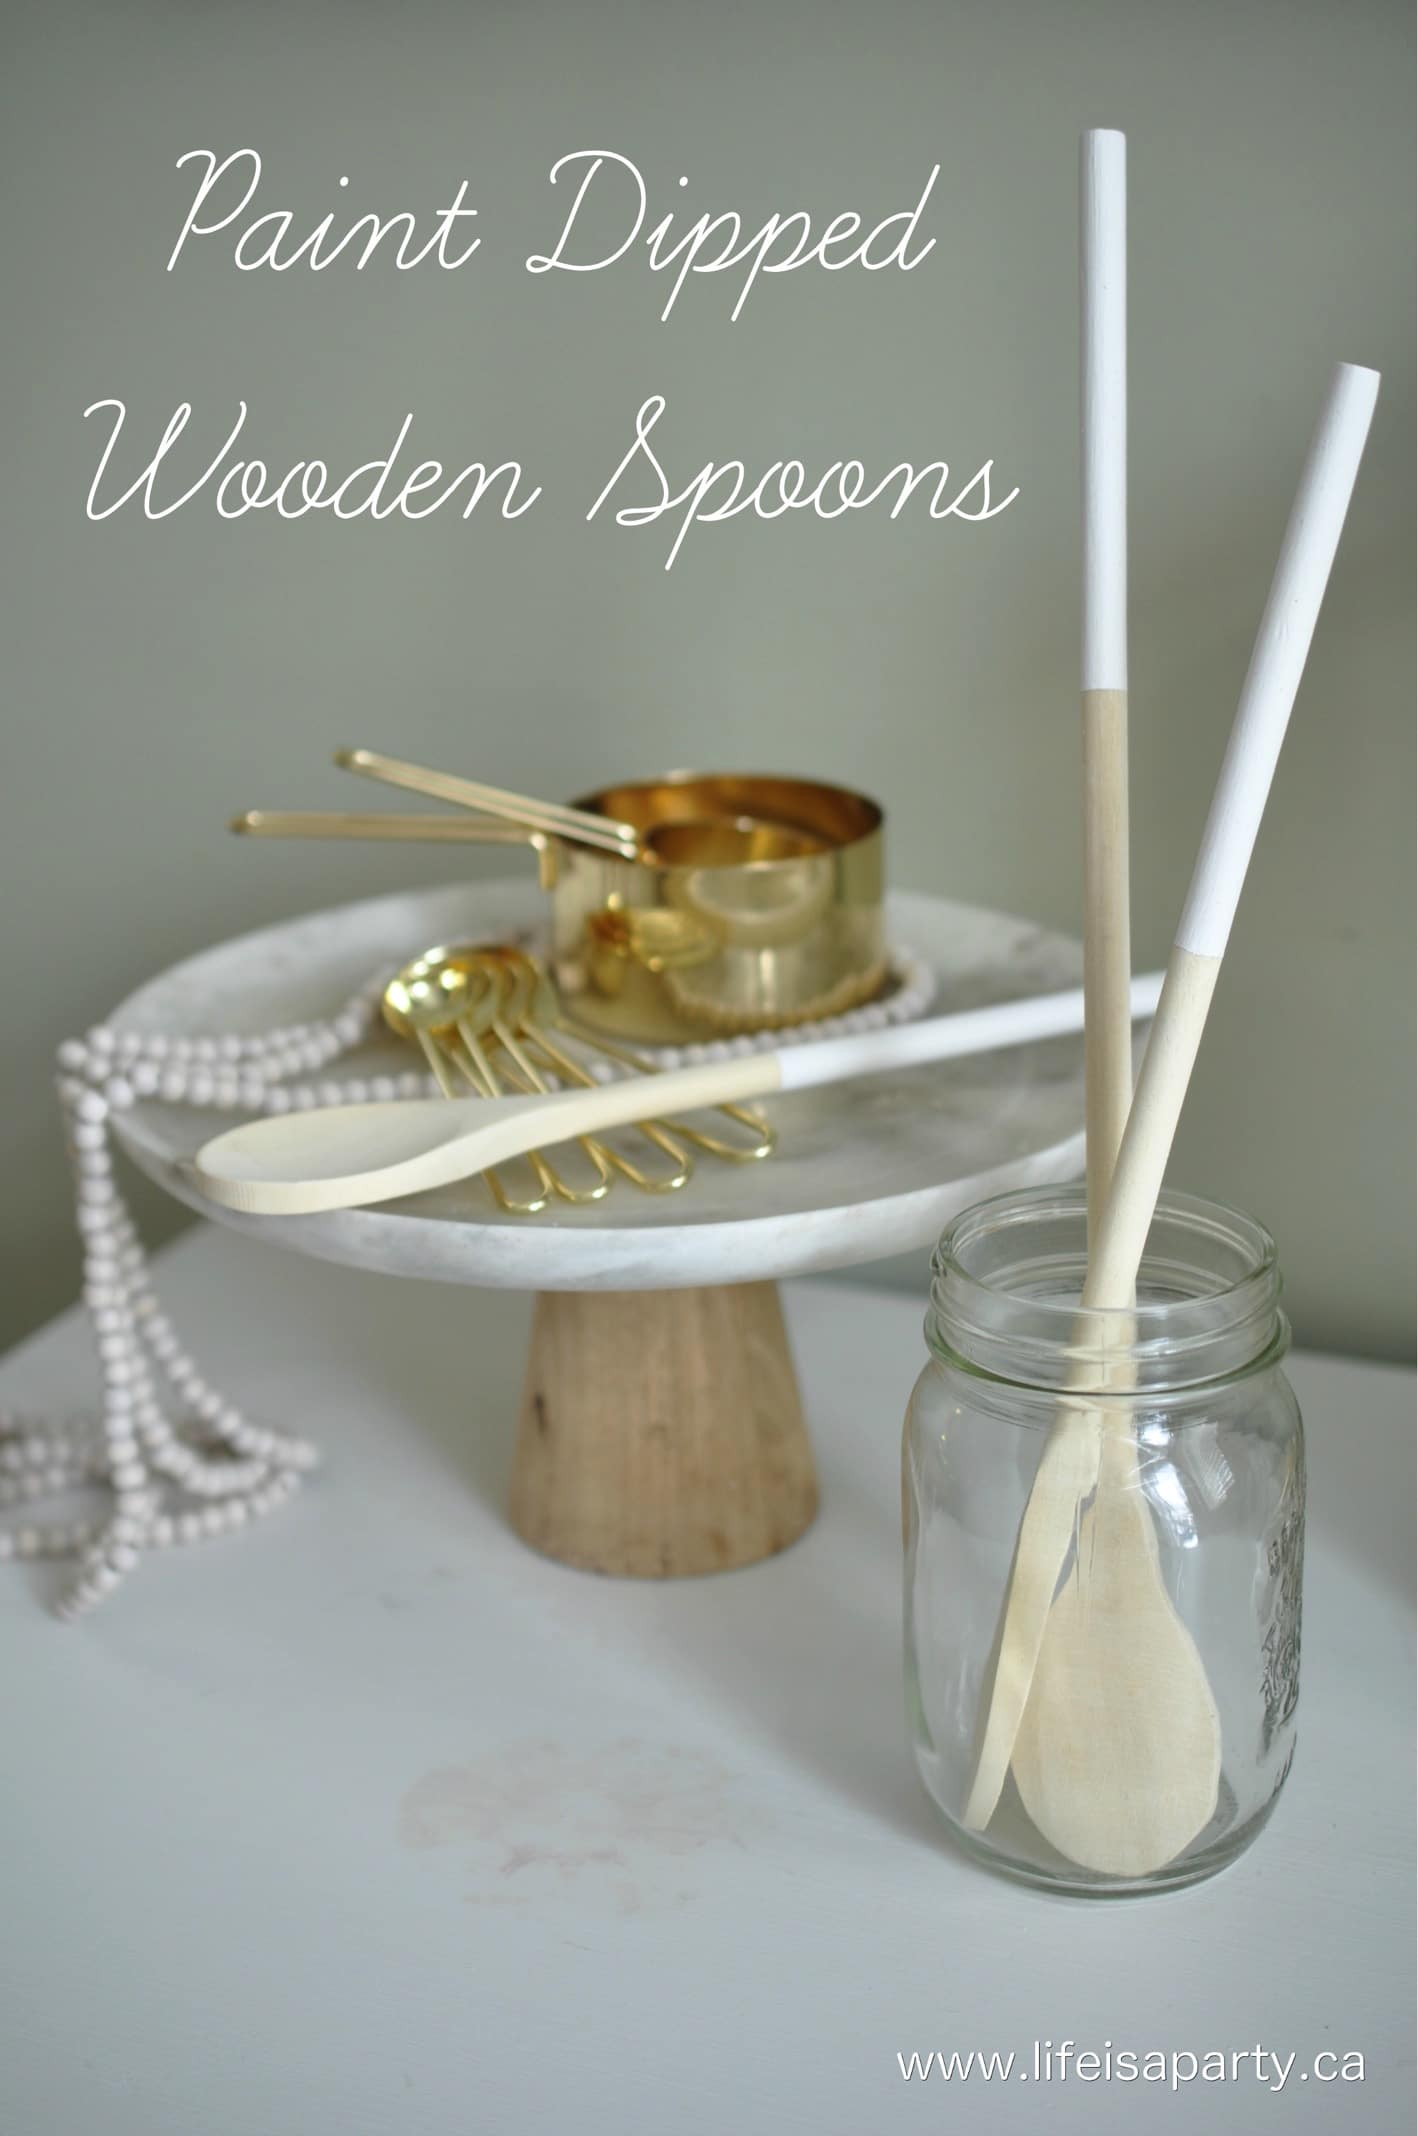 Paint Dipped Wooden Spoons: Easy DIY to take dollar store wooden spoons from boring to beautiful, the perfect stylish addition to any kitchen.